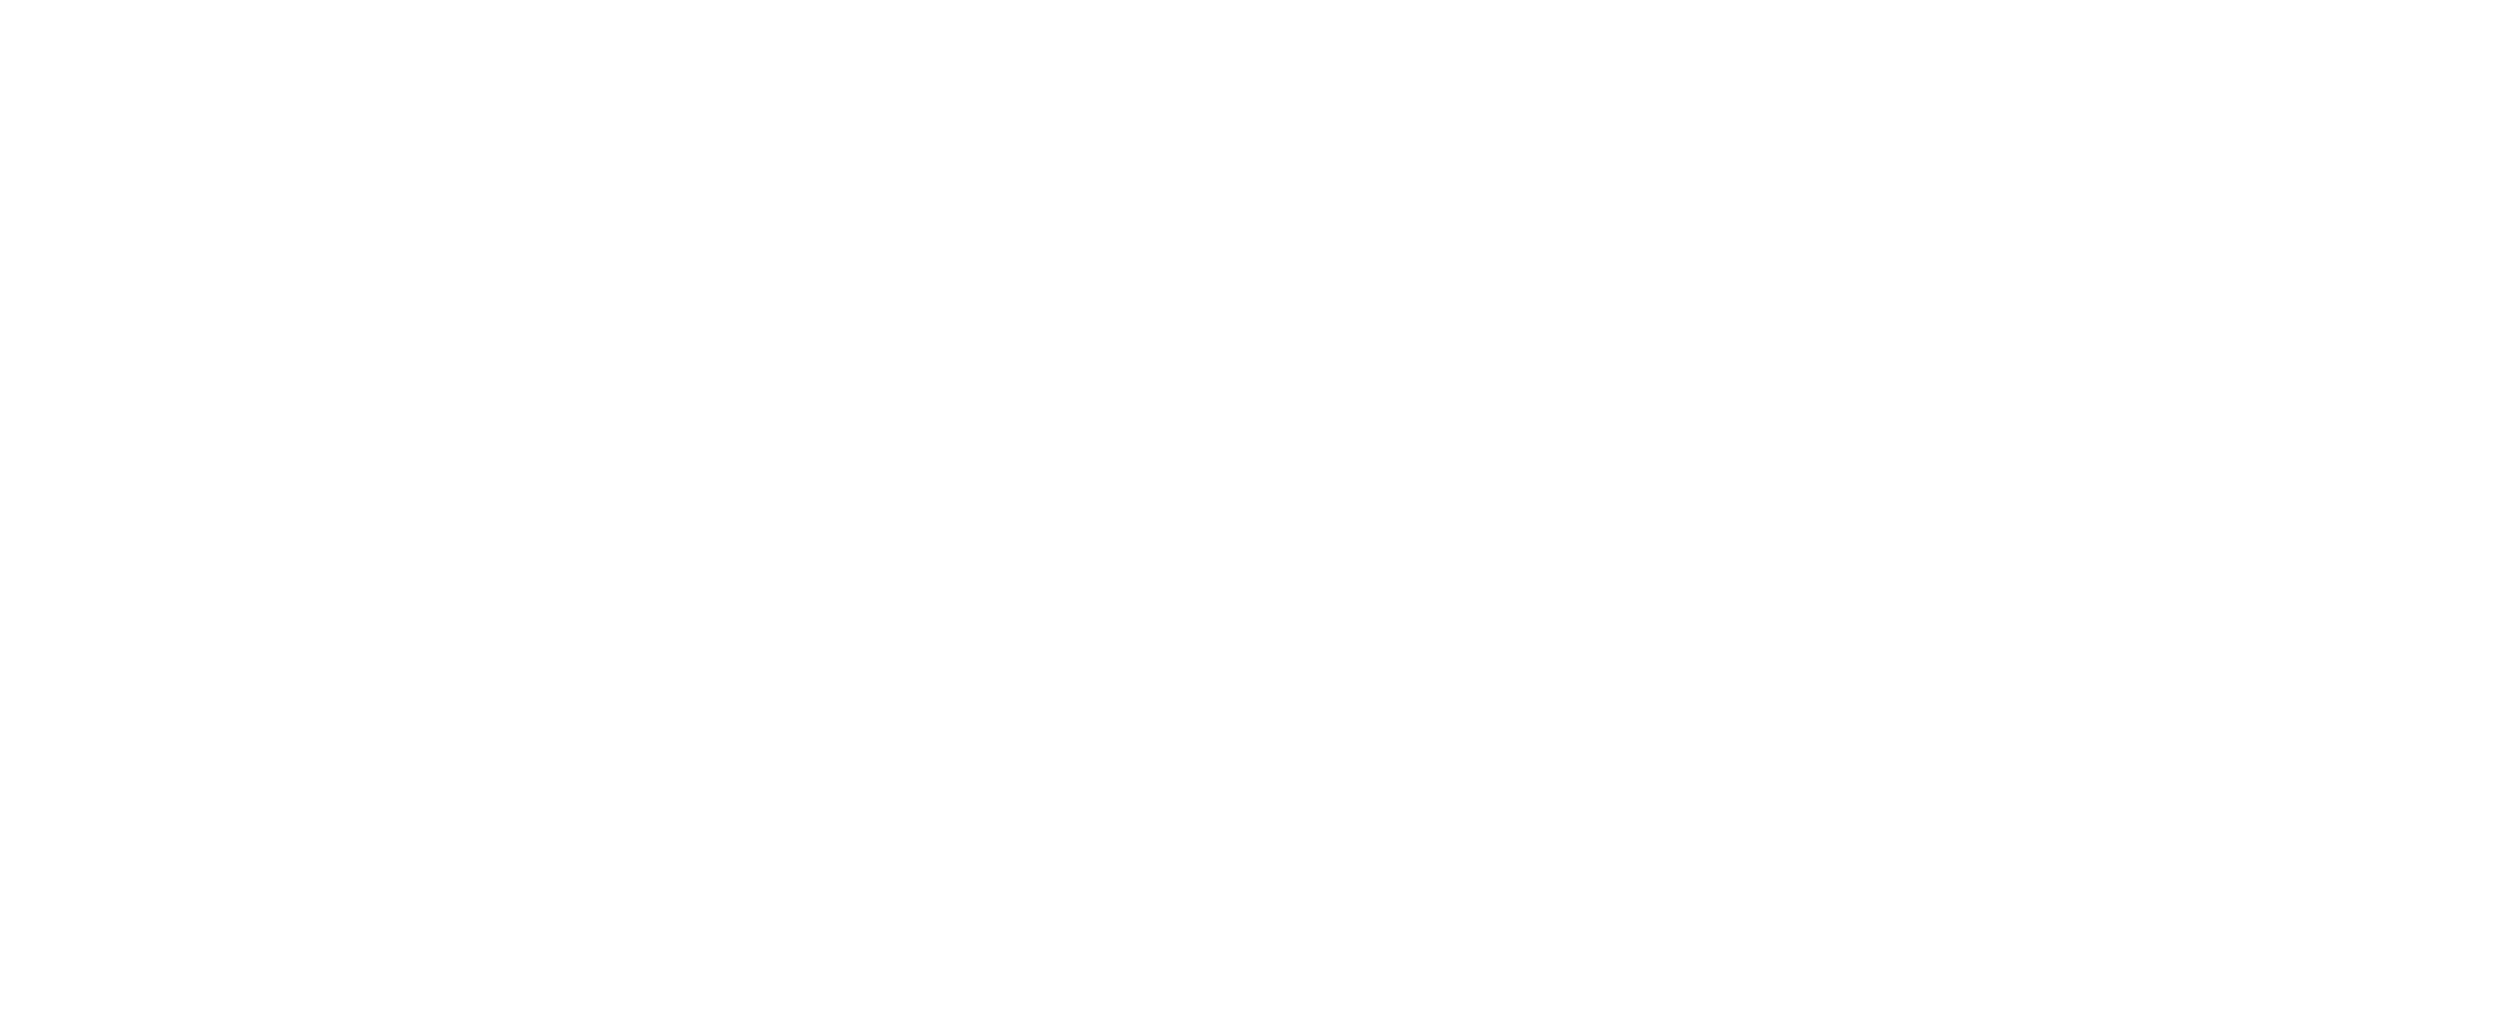 OK eXpedition